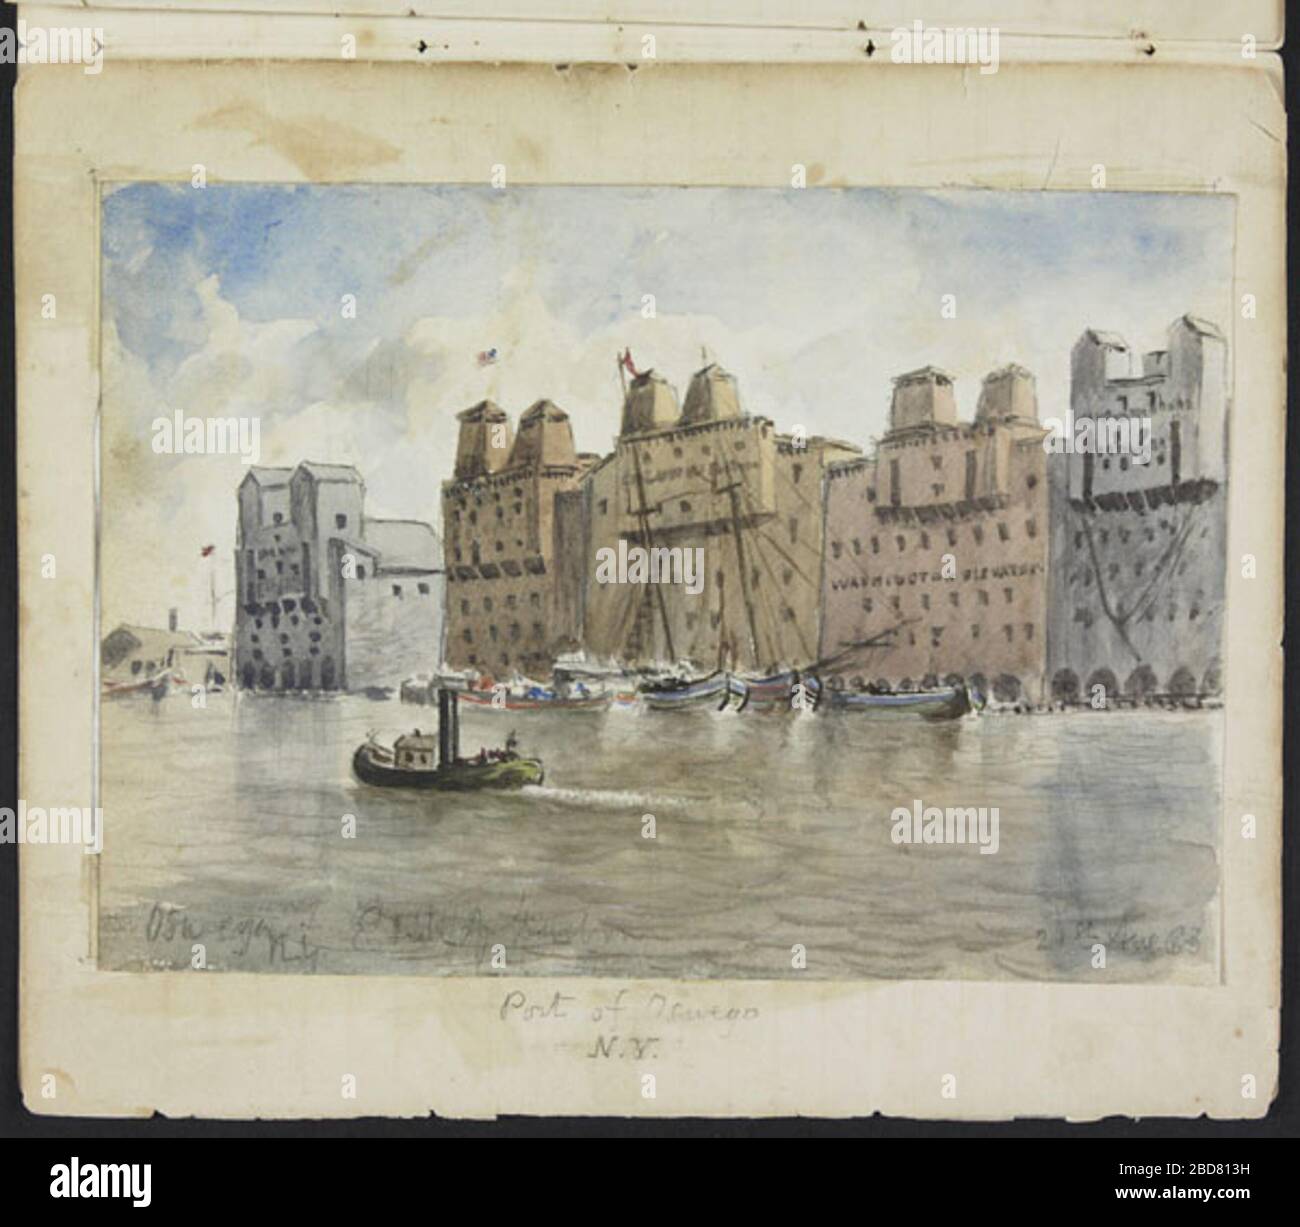 'English: Port of Oswego, N.Y.; English: Watercolour from Henry Egerton Baines' journal, A Month's Leave or The Cruise of the Breeze. Watercolour depicts a tugboat and buildings in the port of Oswego, N.Y.; 21 August 1863date QS:P571,+1863-08-21T00:00:00Z/11; ' Stock Photo